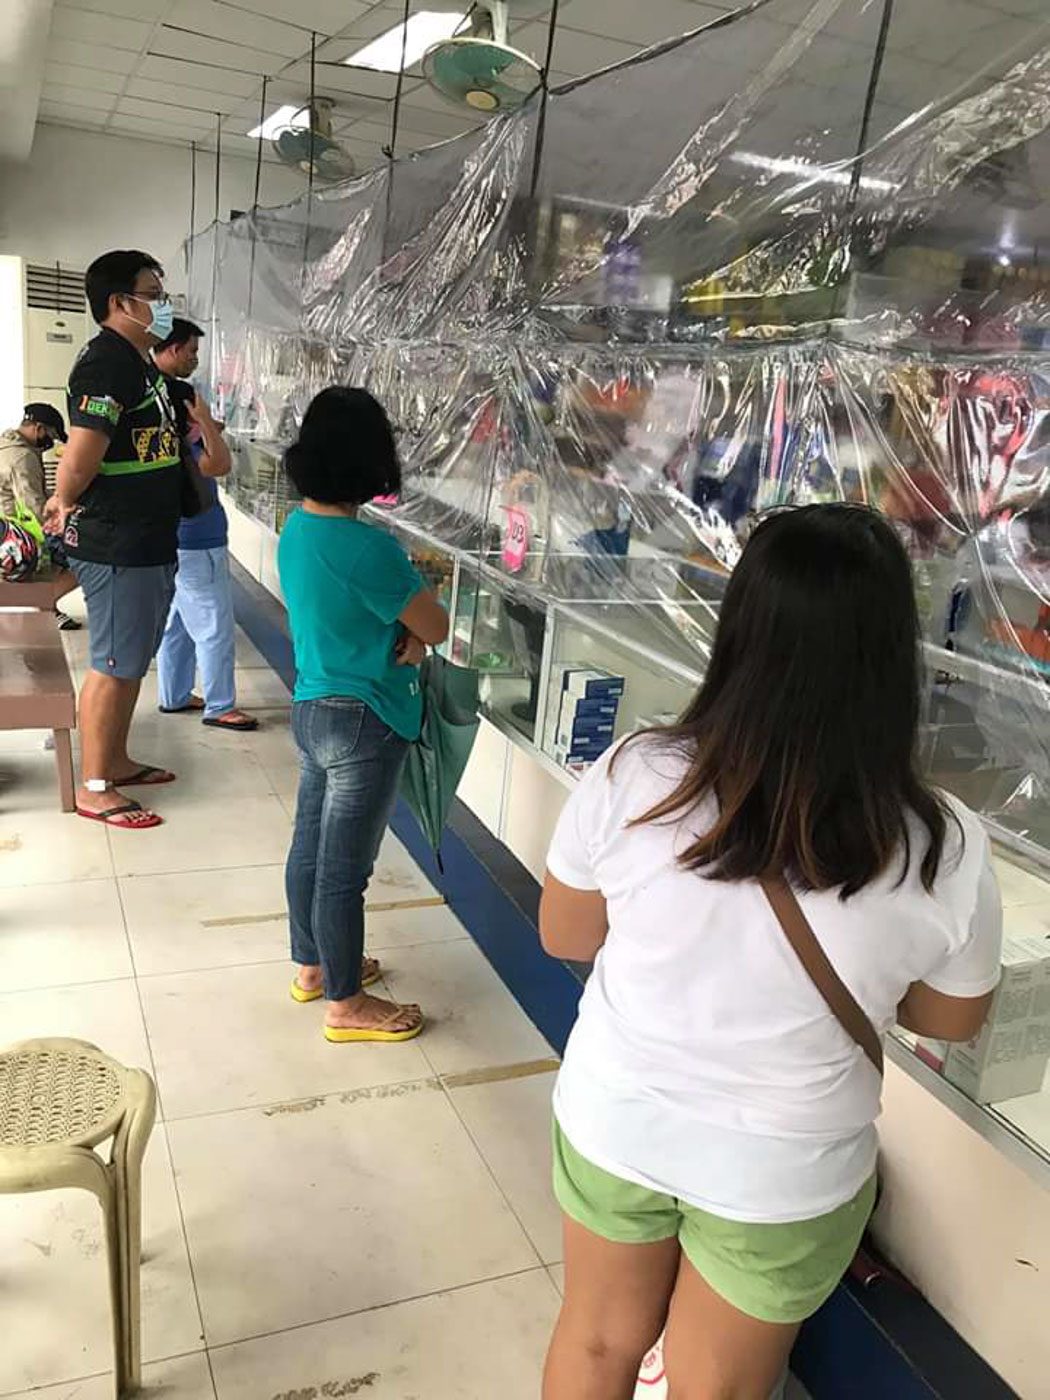 BARRIER. The Disaster Risk Reduction and Management Office of Bacolod City monitors the situation in the supermarkets, commercial establishments, and medical facilities on Saturday, May 16. Photos courtesy of Bacolod DRRMO 